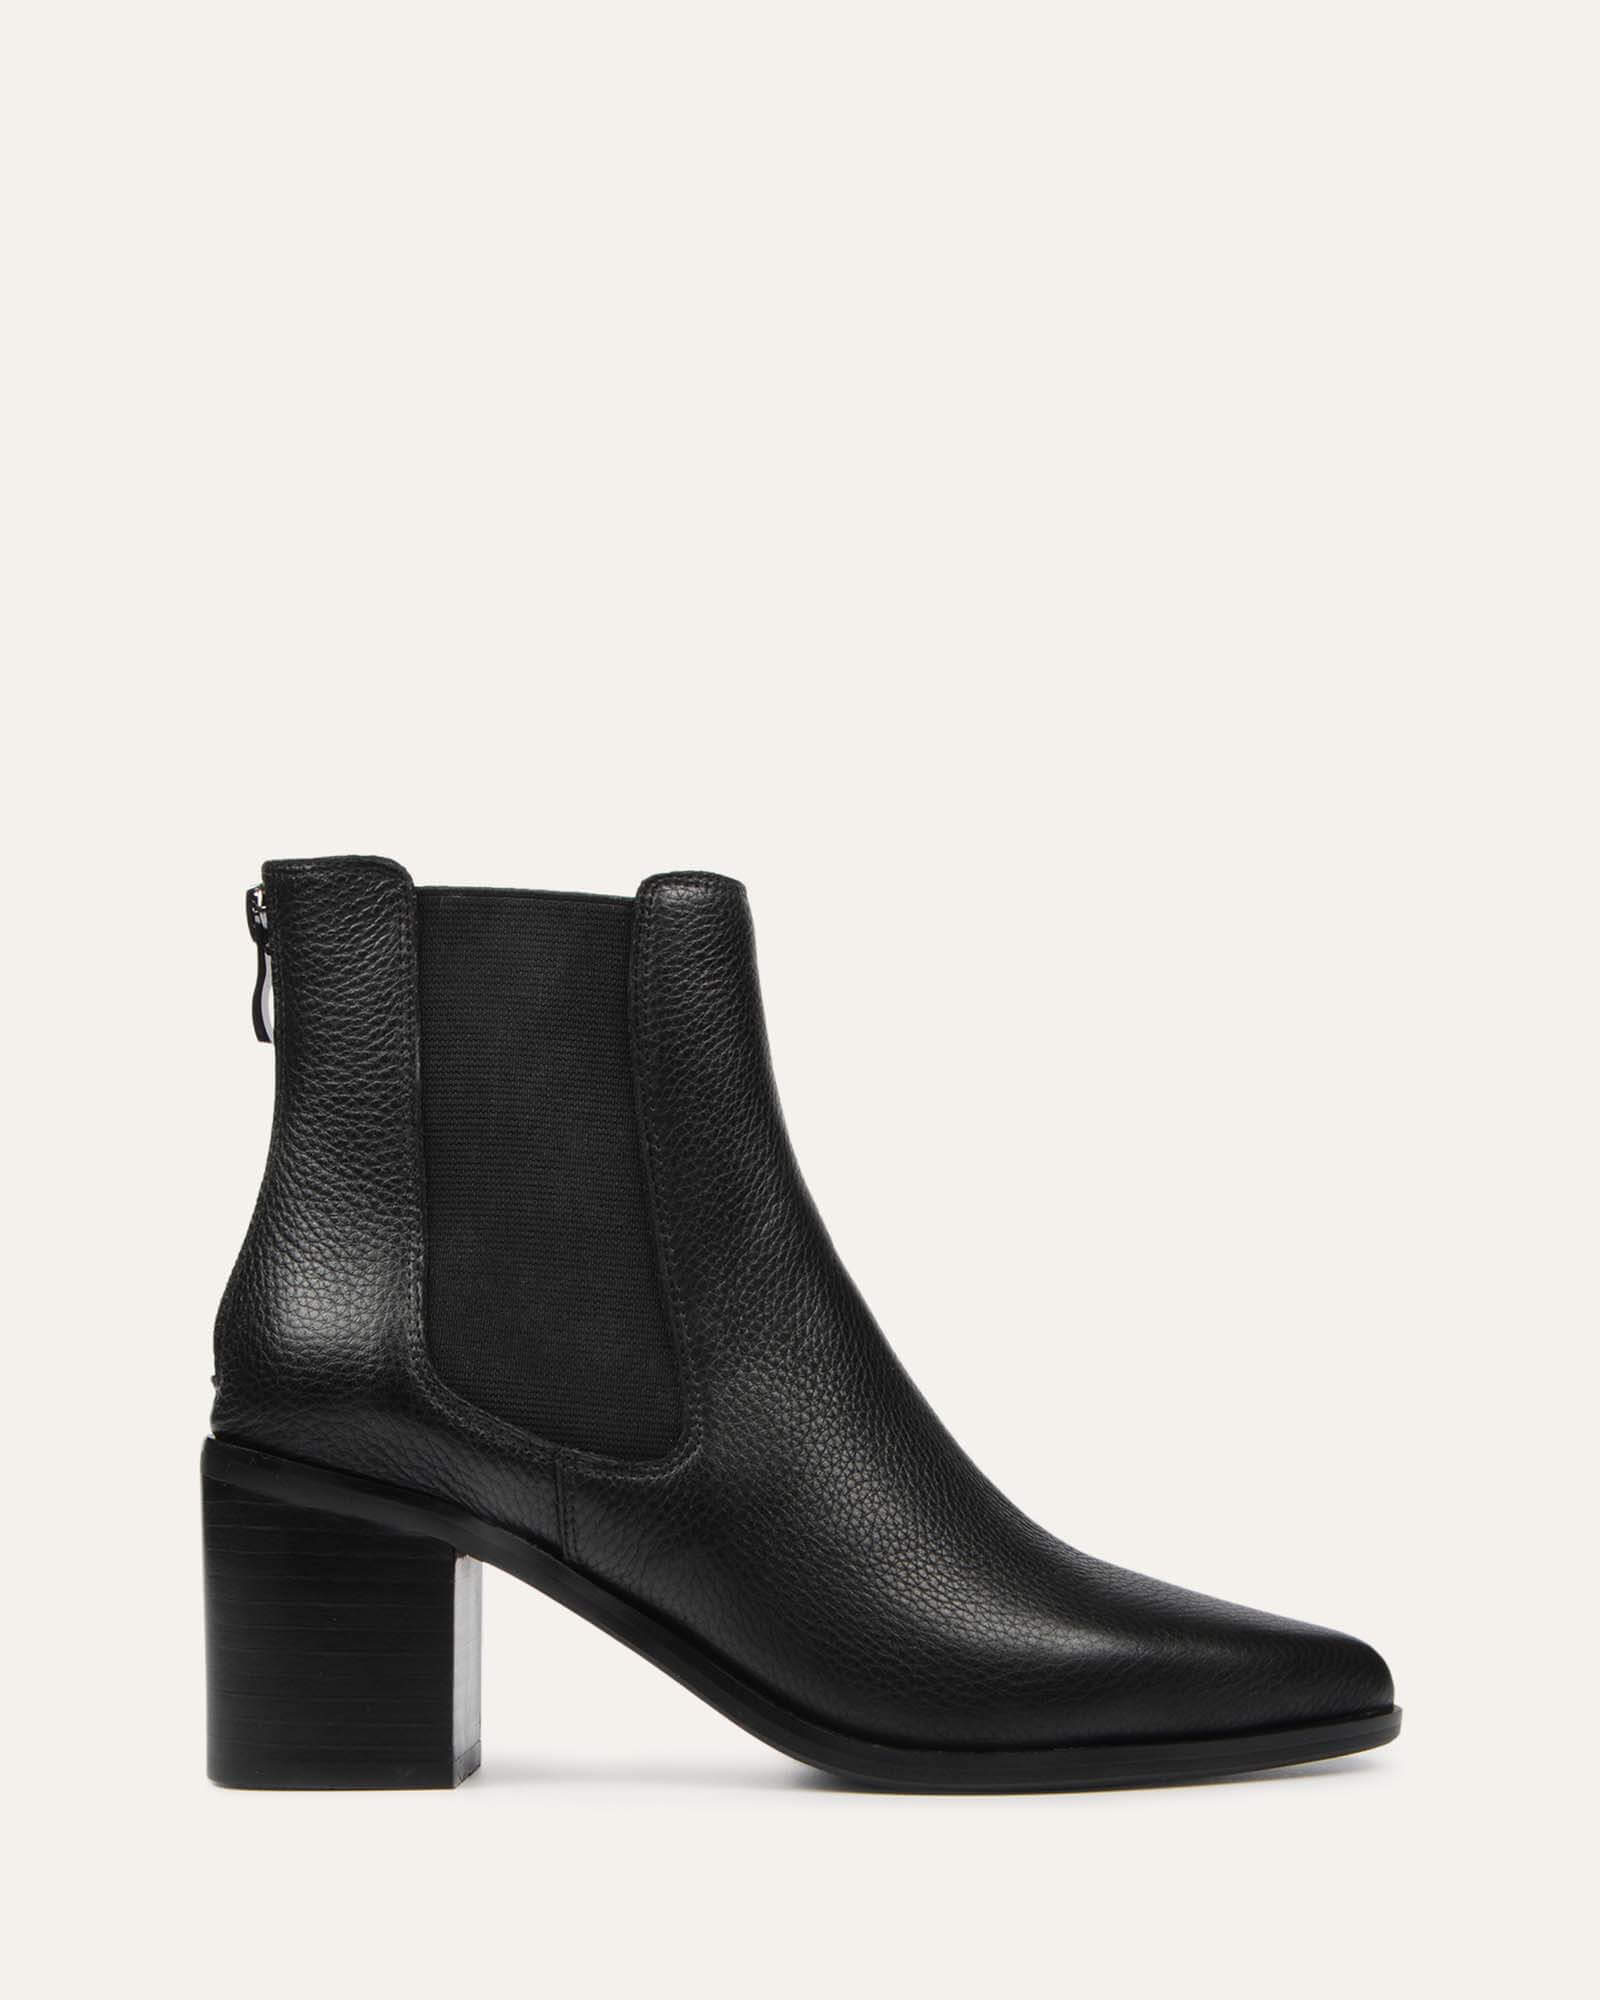 ALLURE MID ANKLE BOOTS BLACK LEATHER - Jo Mercer